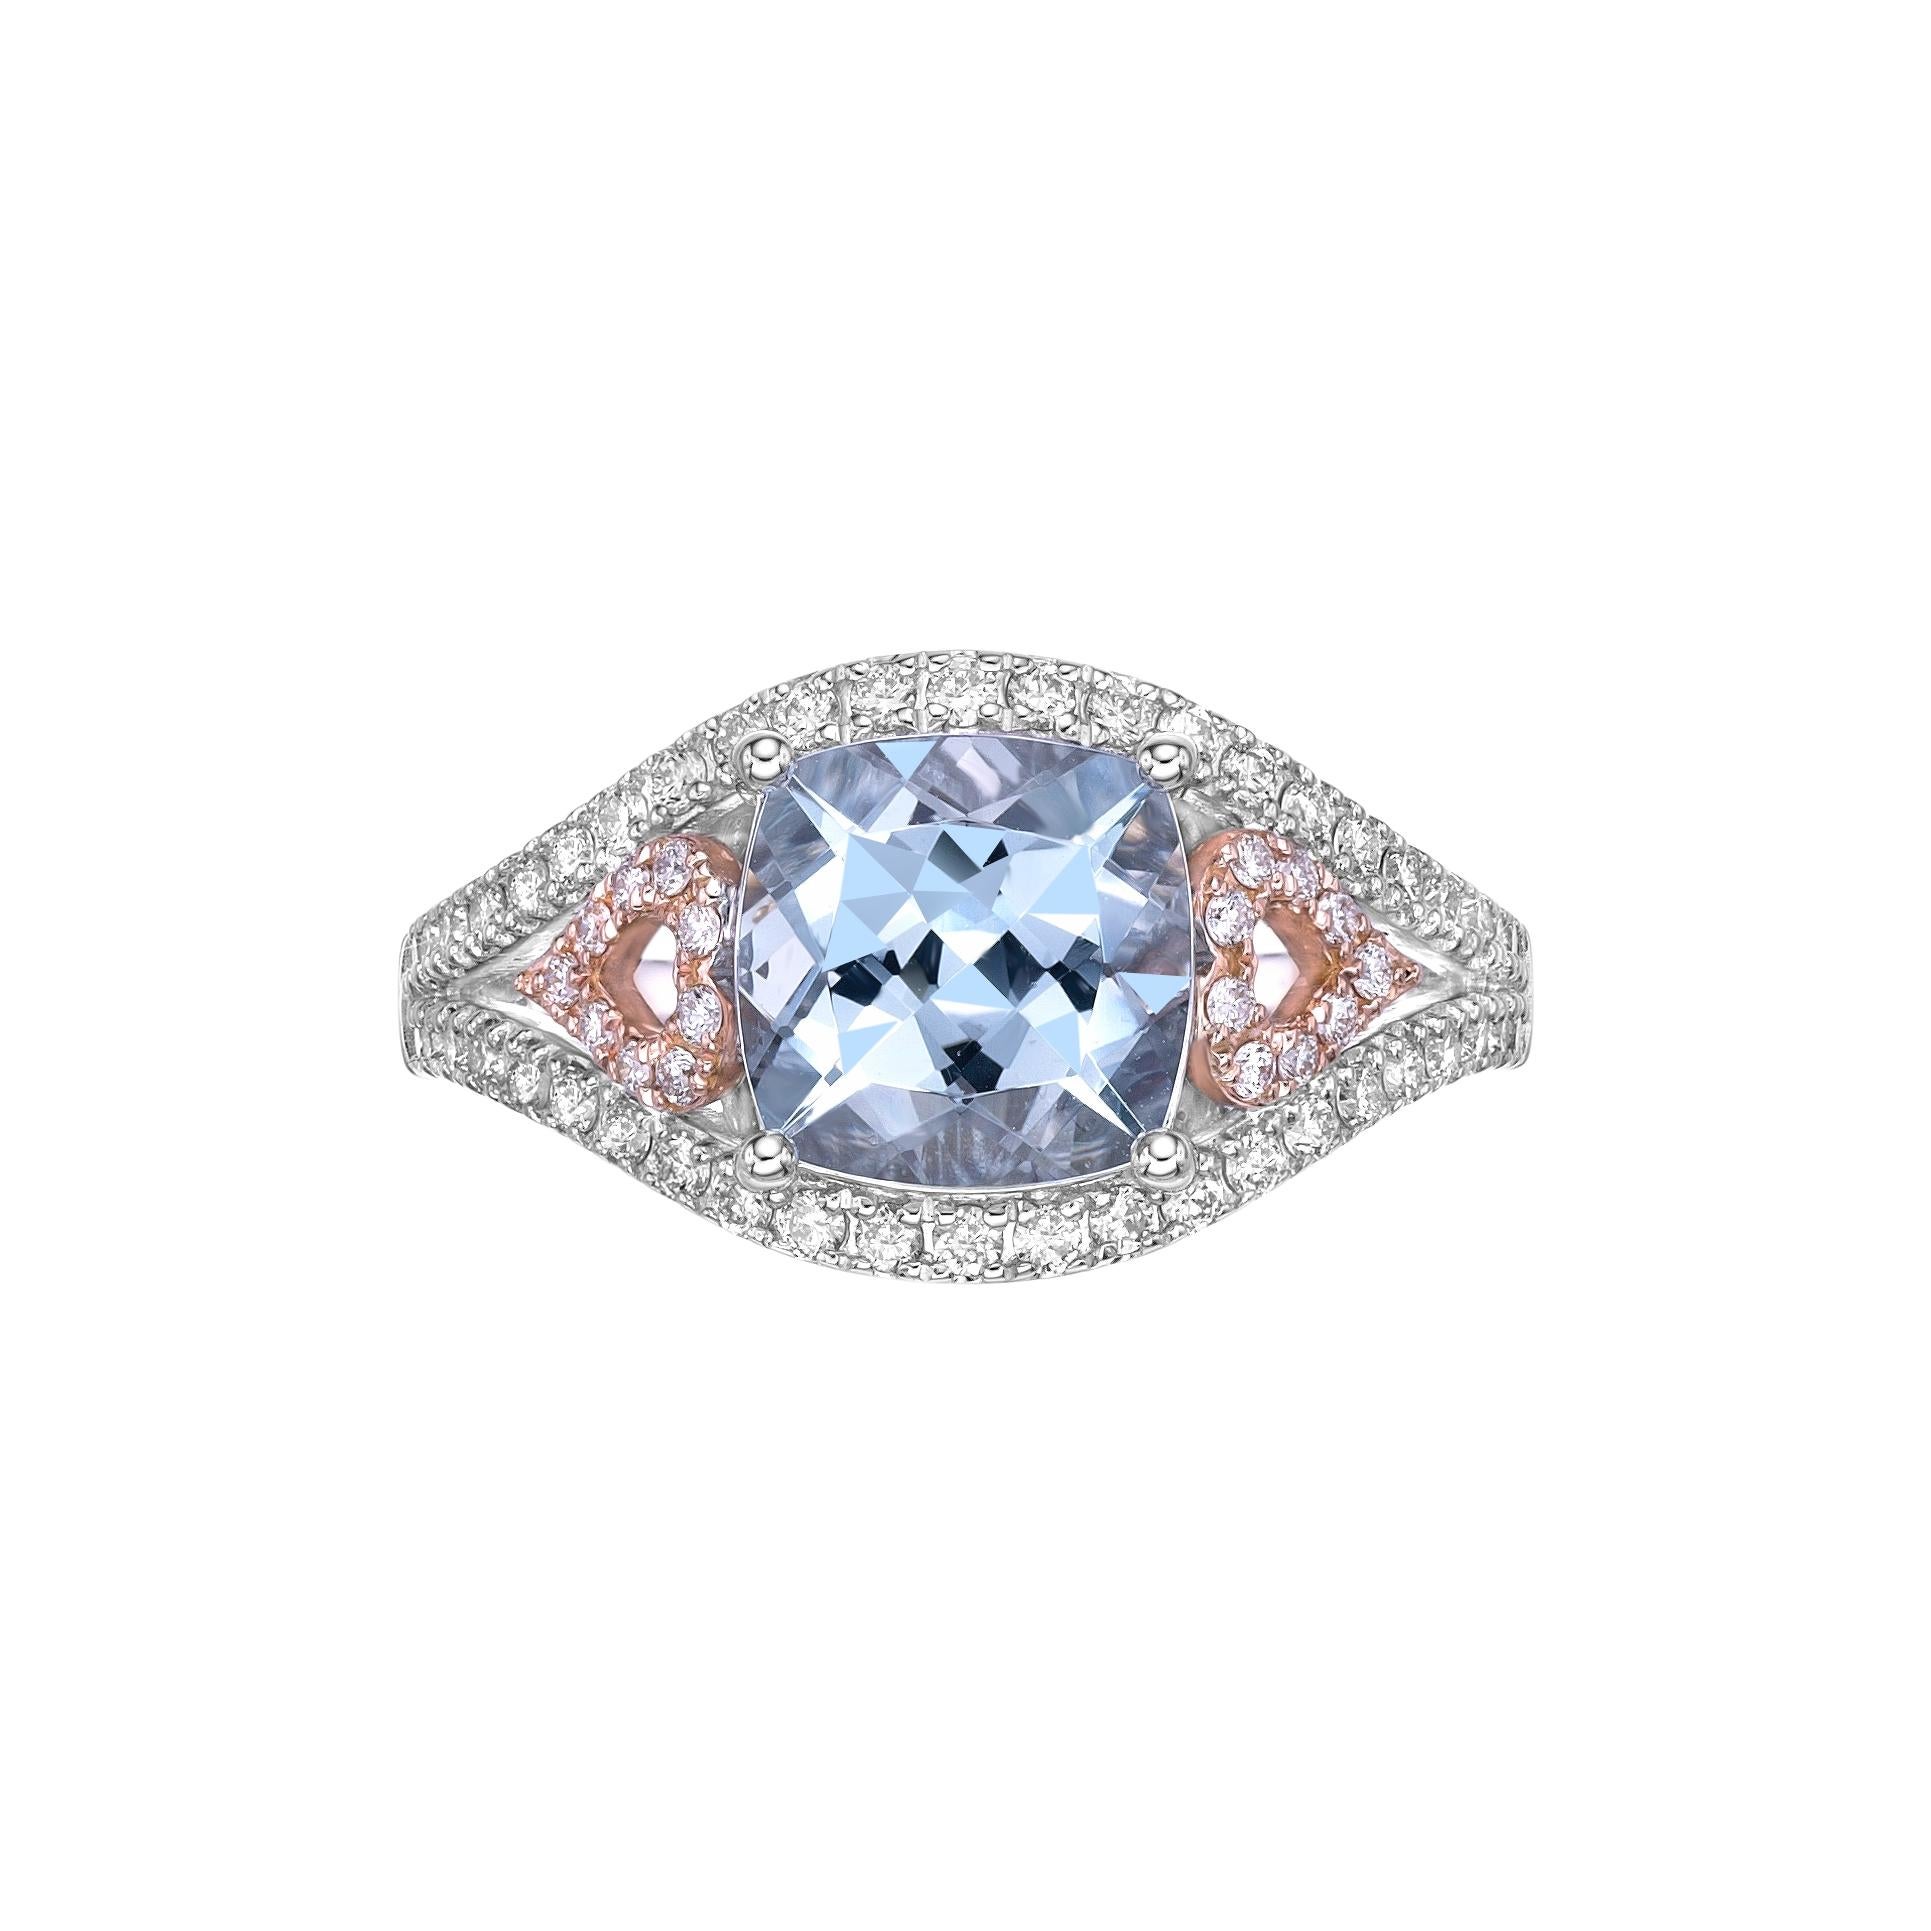 Contemporary 2.12 Carat Aquamarine Fancy Ring in 18Karat White Rose Gold with Diamond.   For Sale